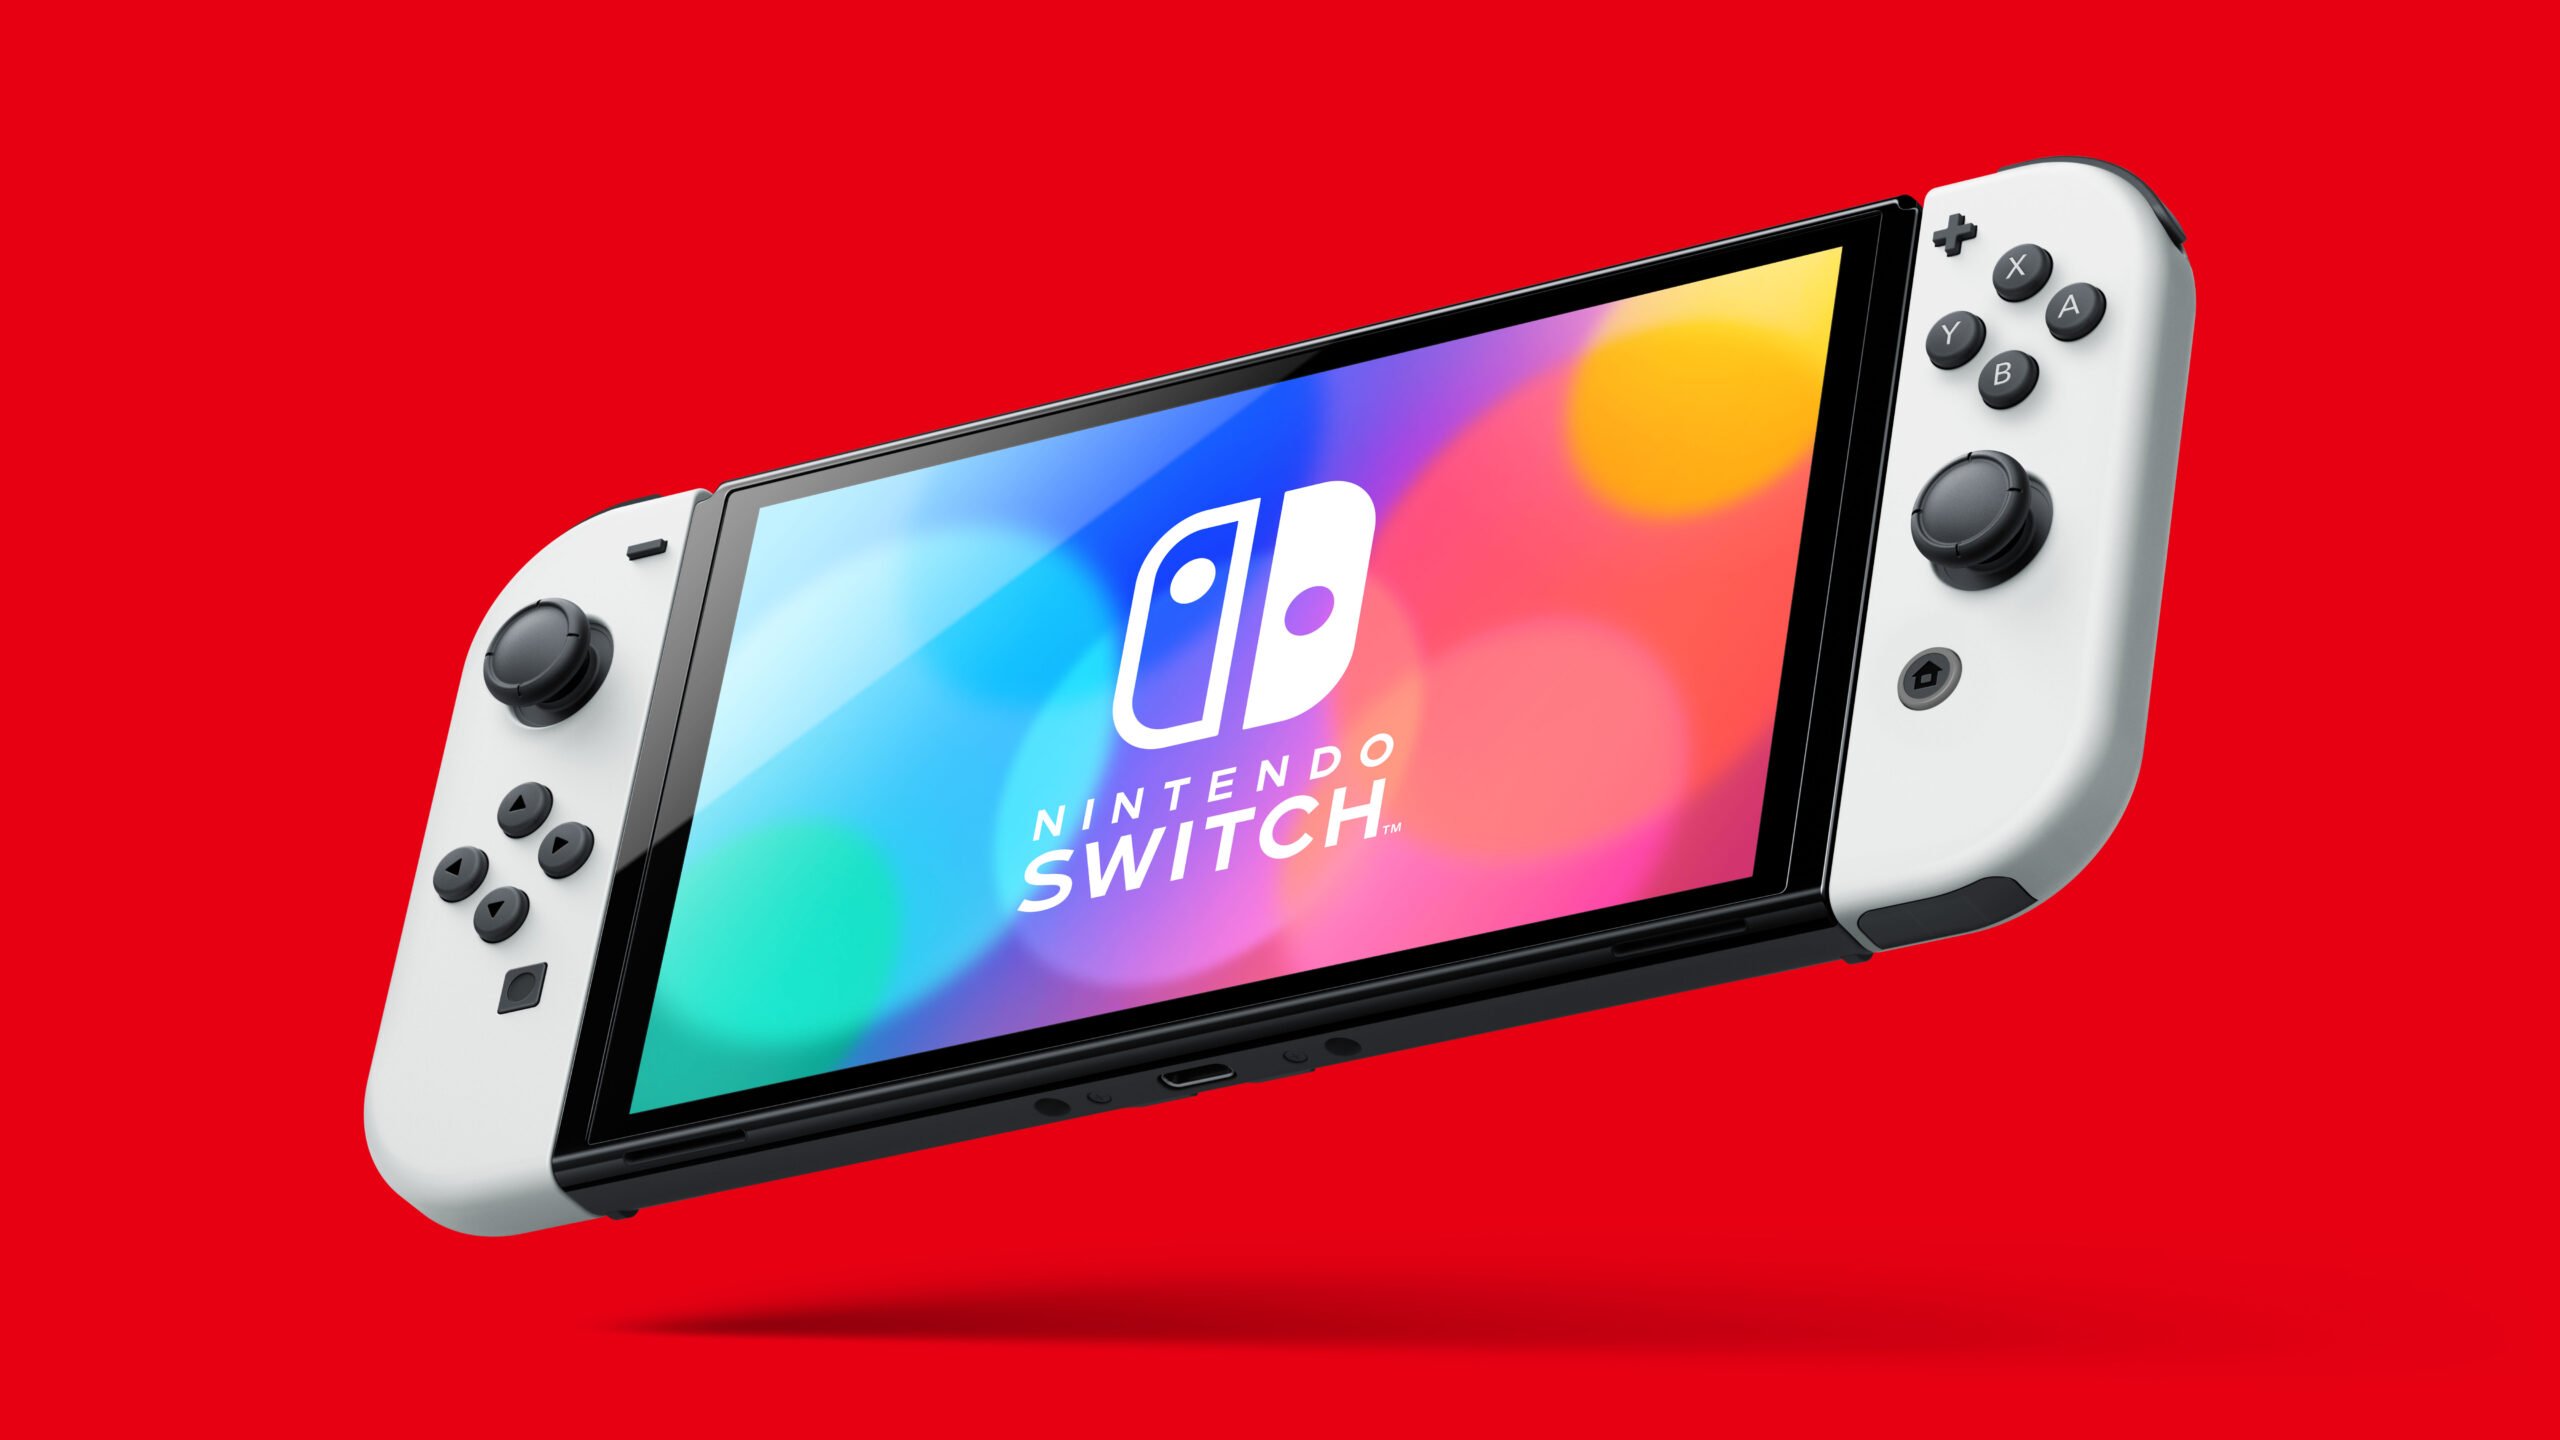 Nintendo Switch clears 122m to outsell Game Boy, PlayStation 4 | VGC